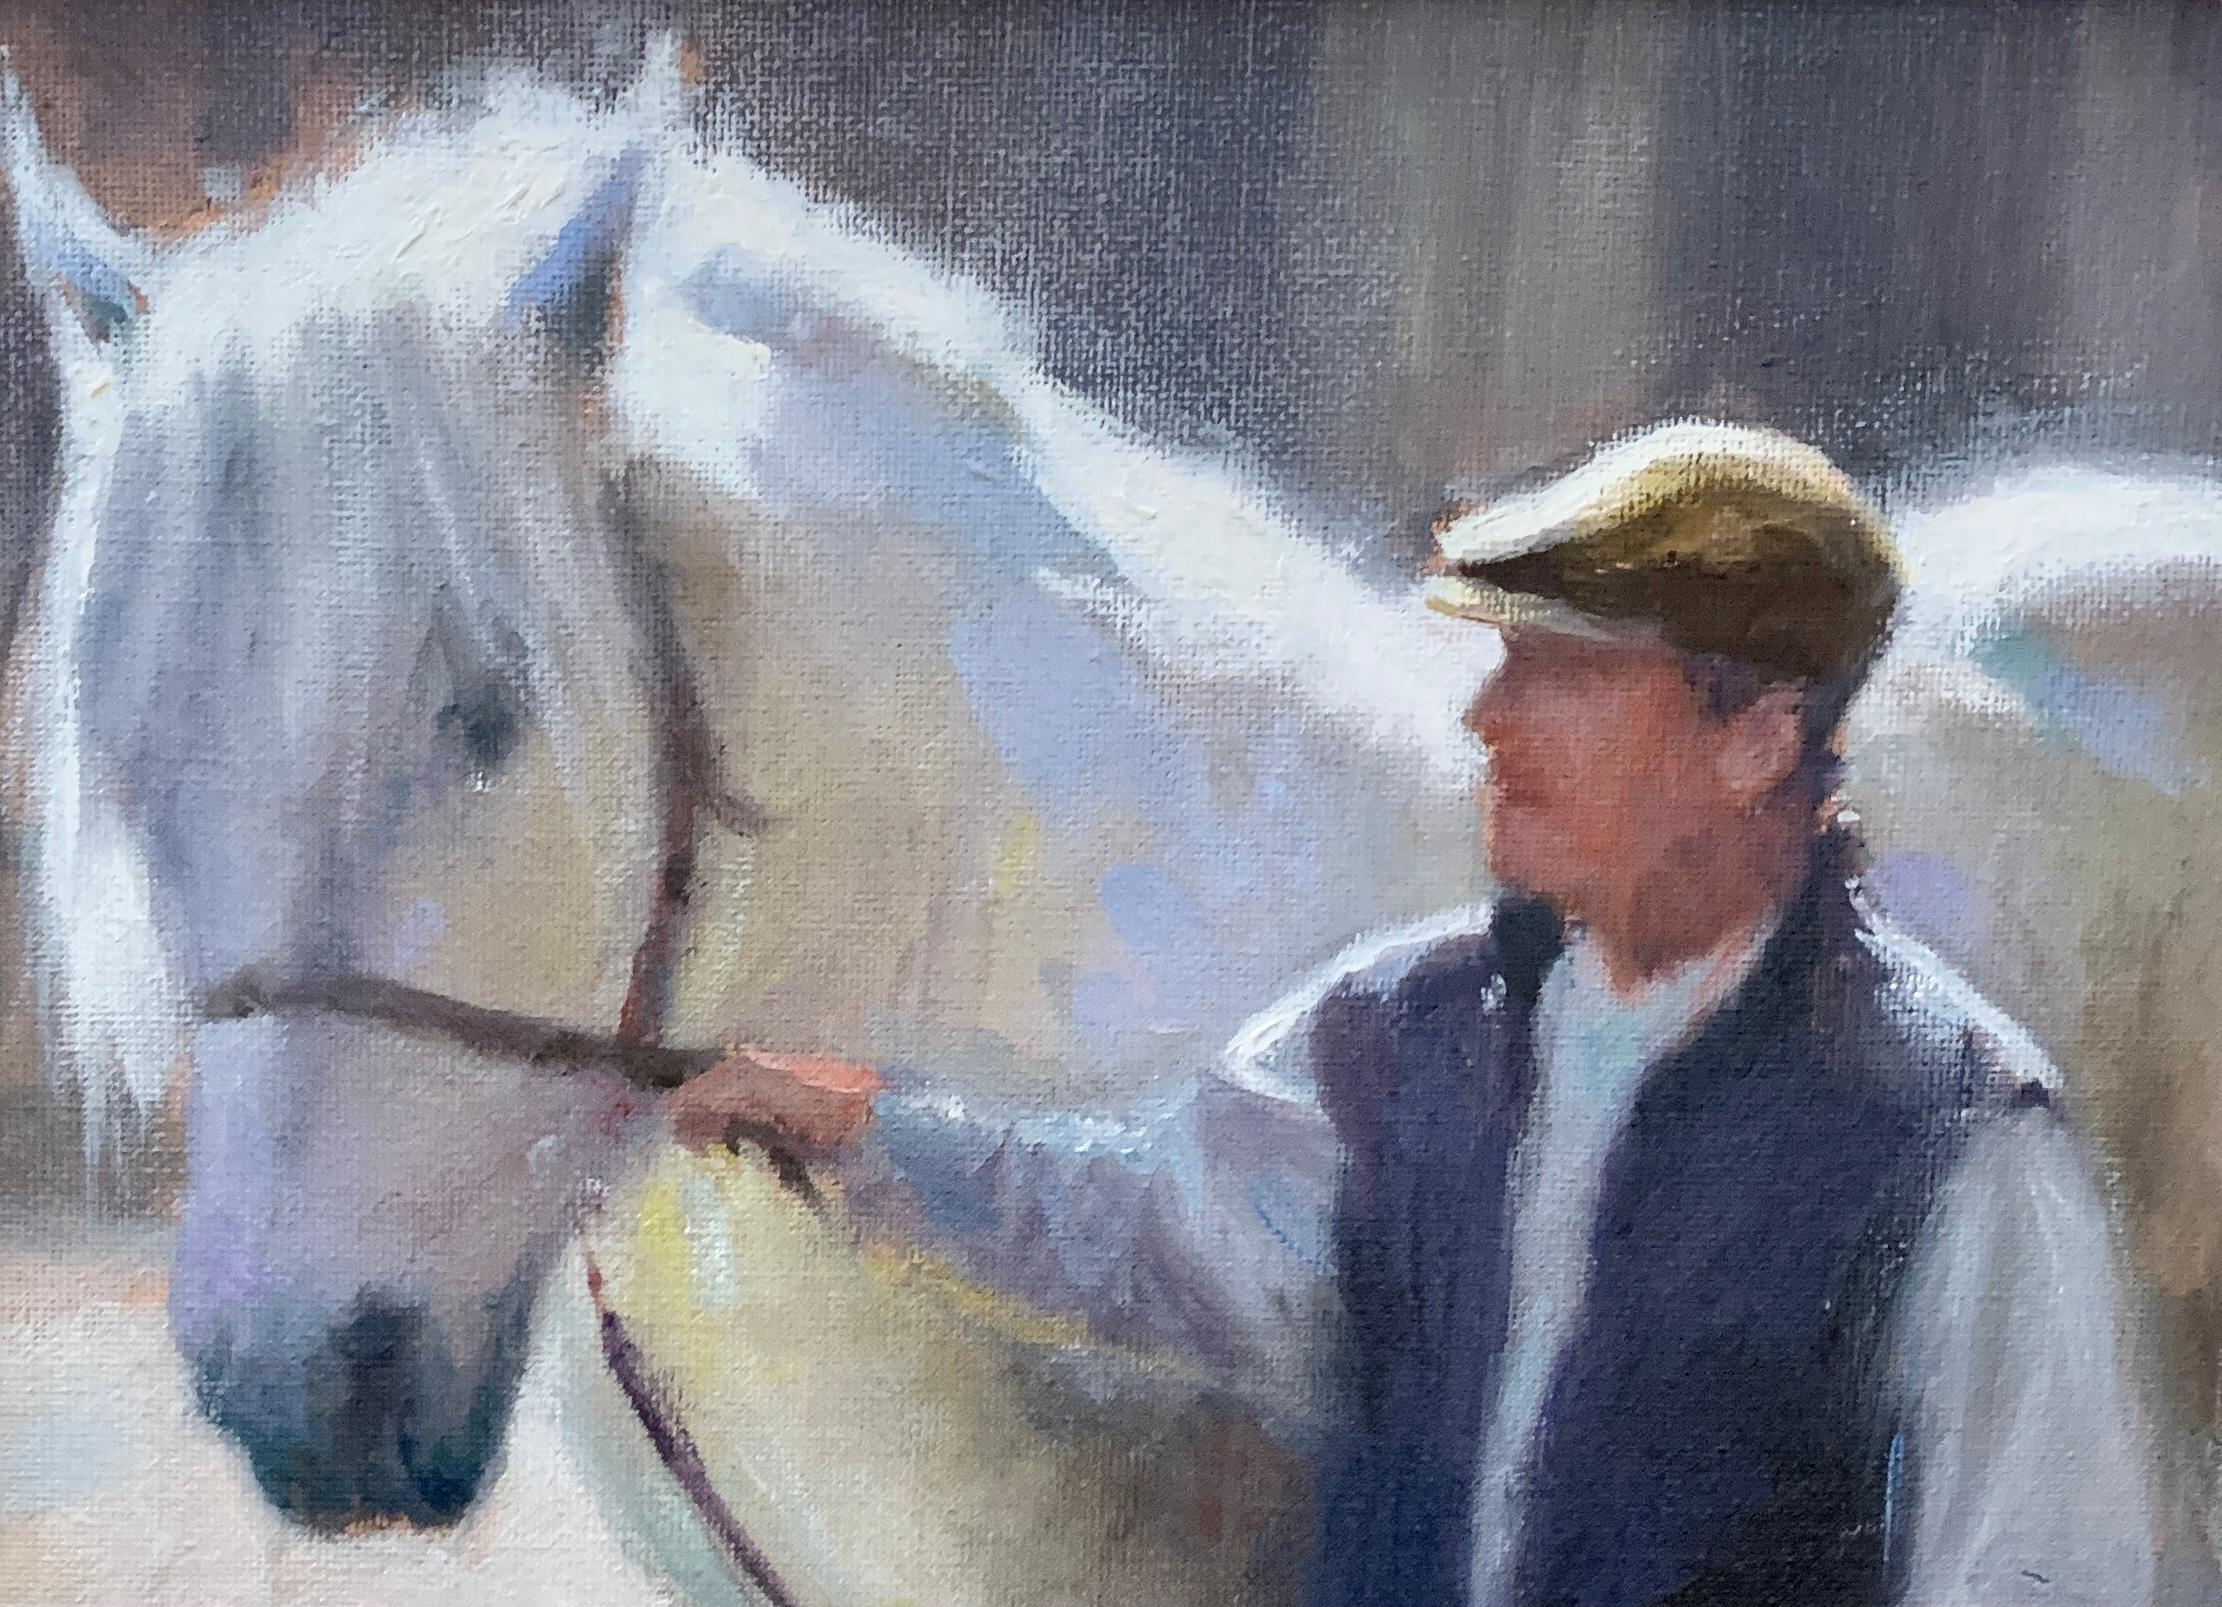 English man with his horse in an Impressionist landscape in an English Summer

Sheath was born in London in 1946. At the age of ten, he won an all-London art competition. In 1976 he started painting professionally. Shortly afterward he was signed up